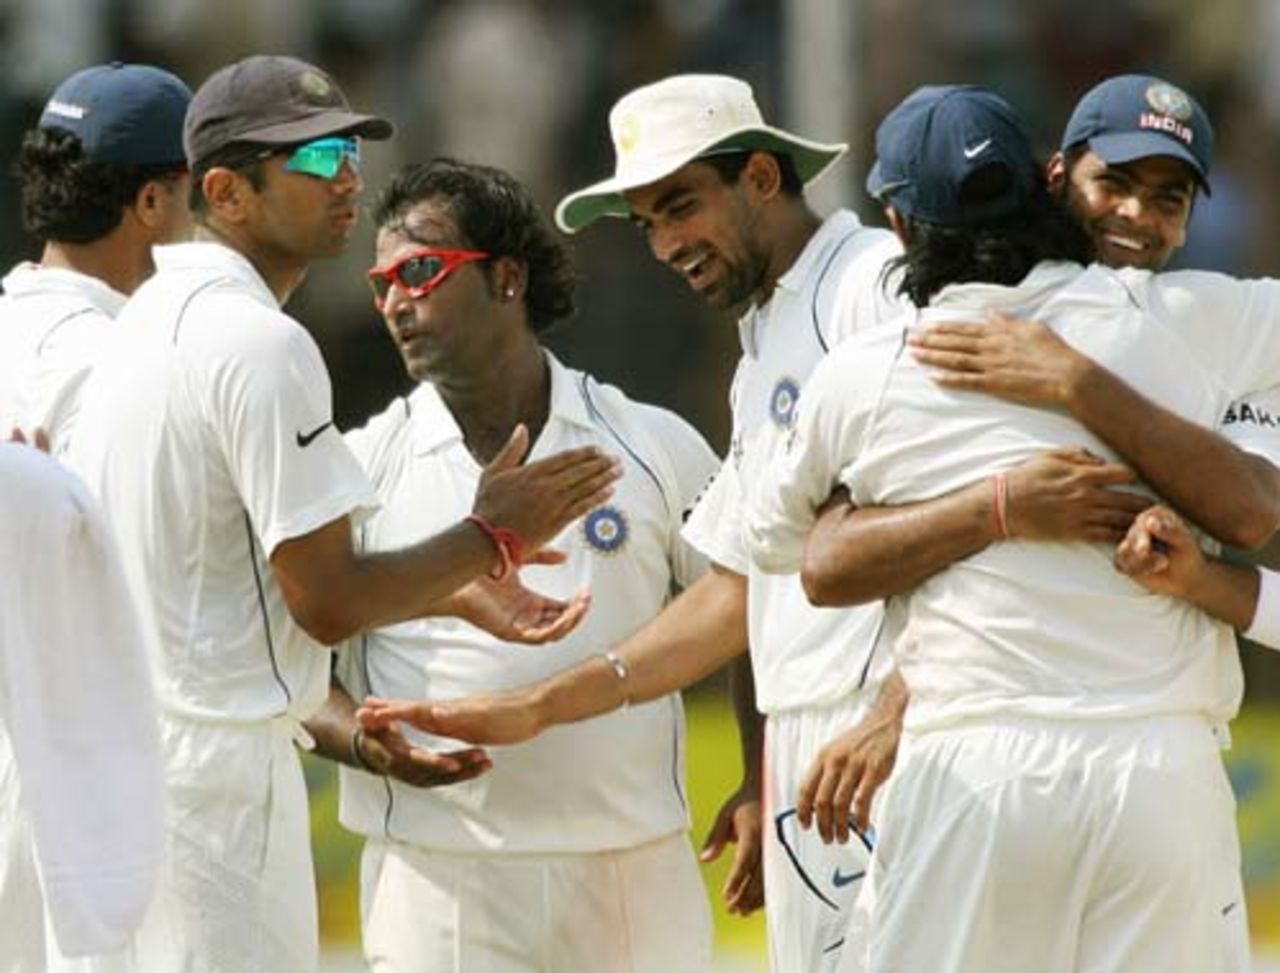 The Indians celebrate after Mohammad Rafique was stumped off Ramesh Powar, Bangladesh v India, 1st Test, Chittagong, 4th day, May 21, 2007